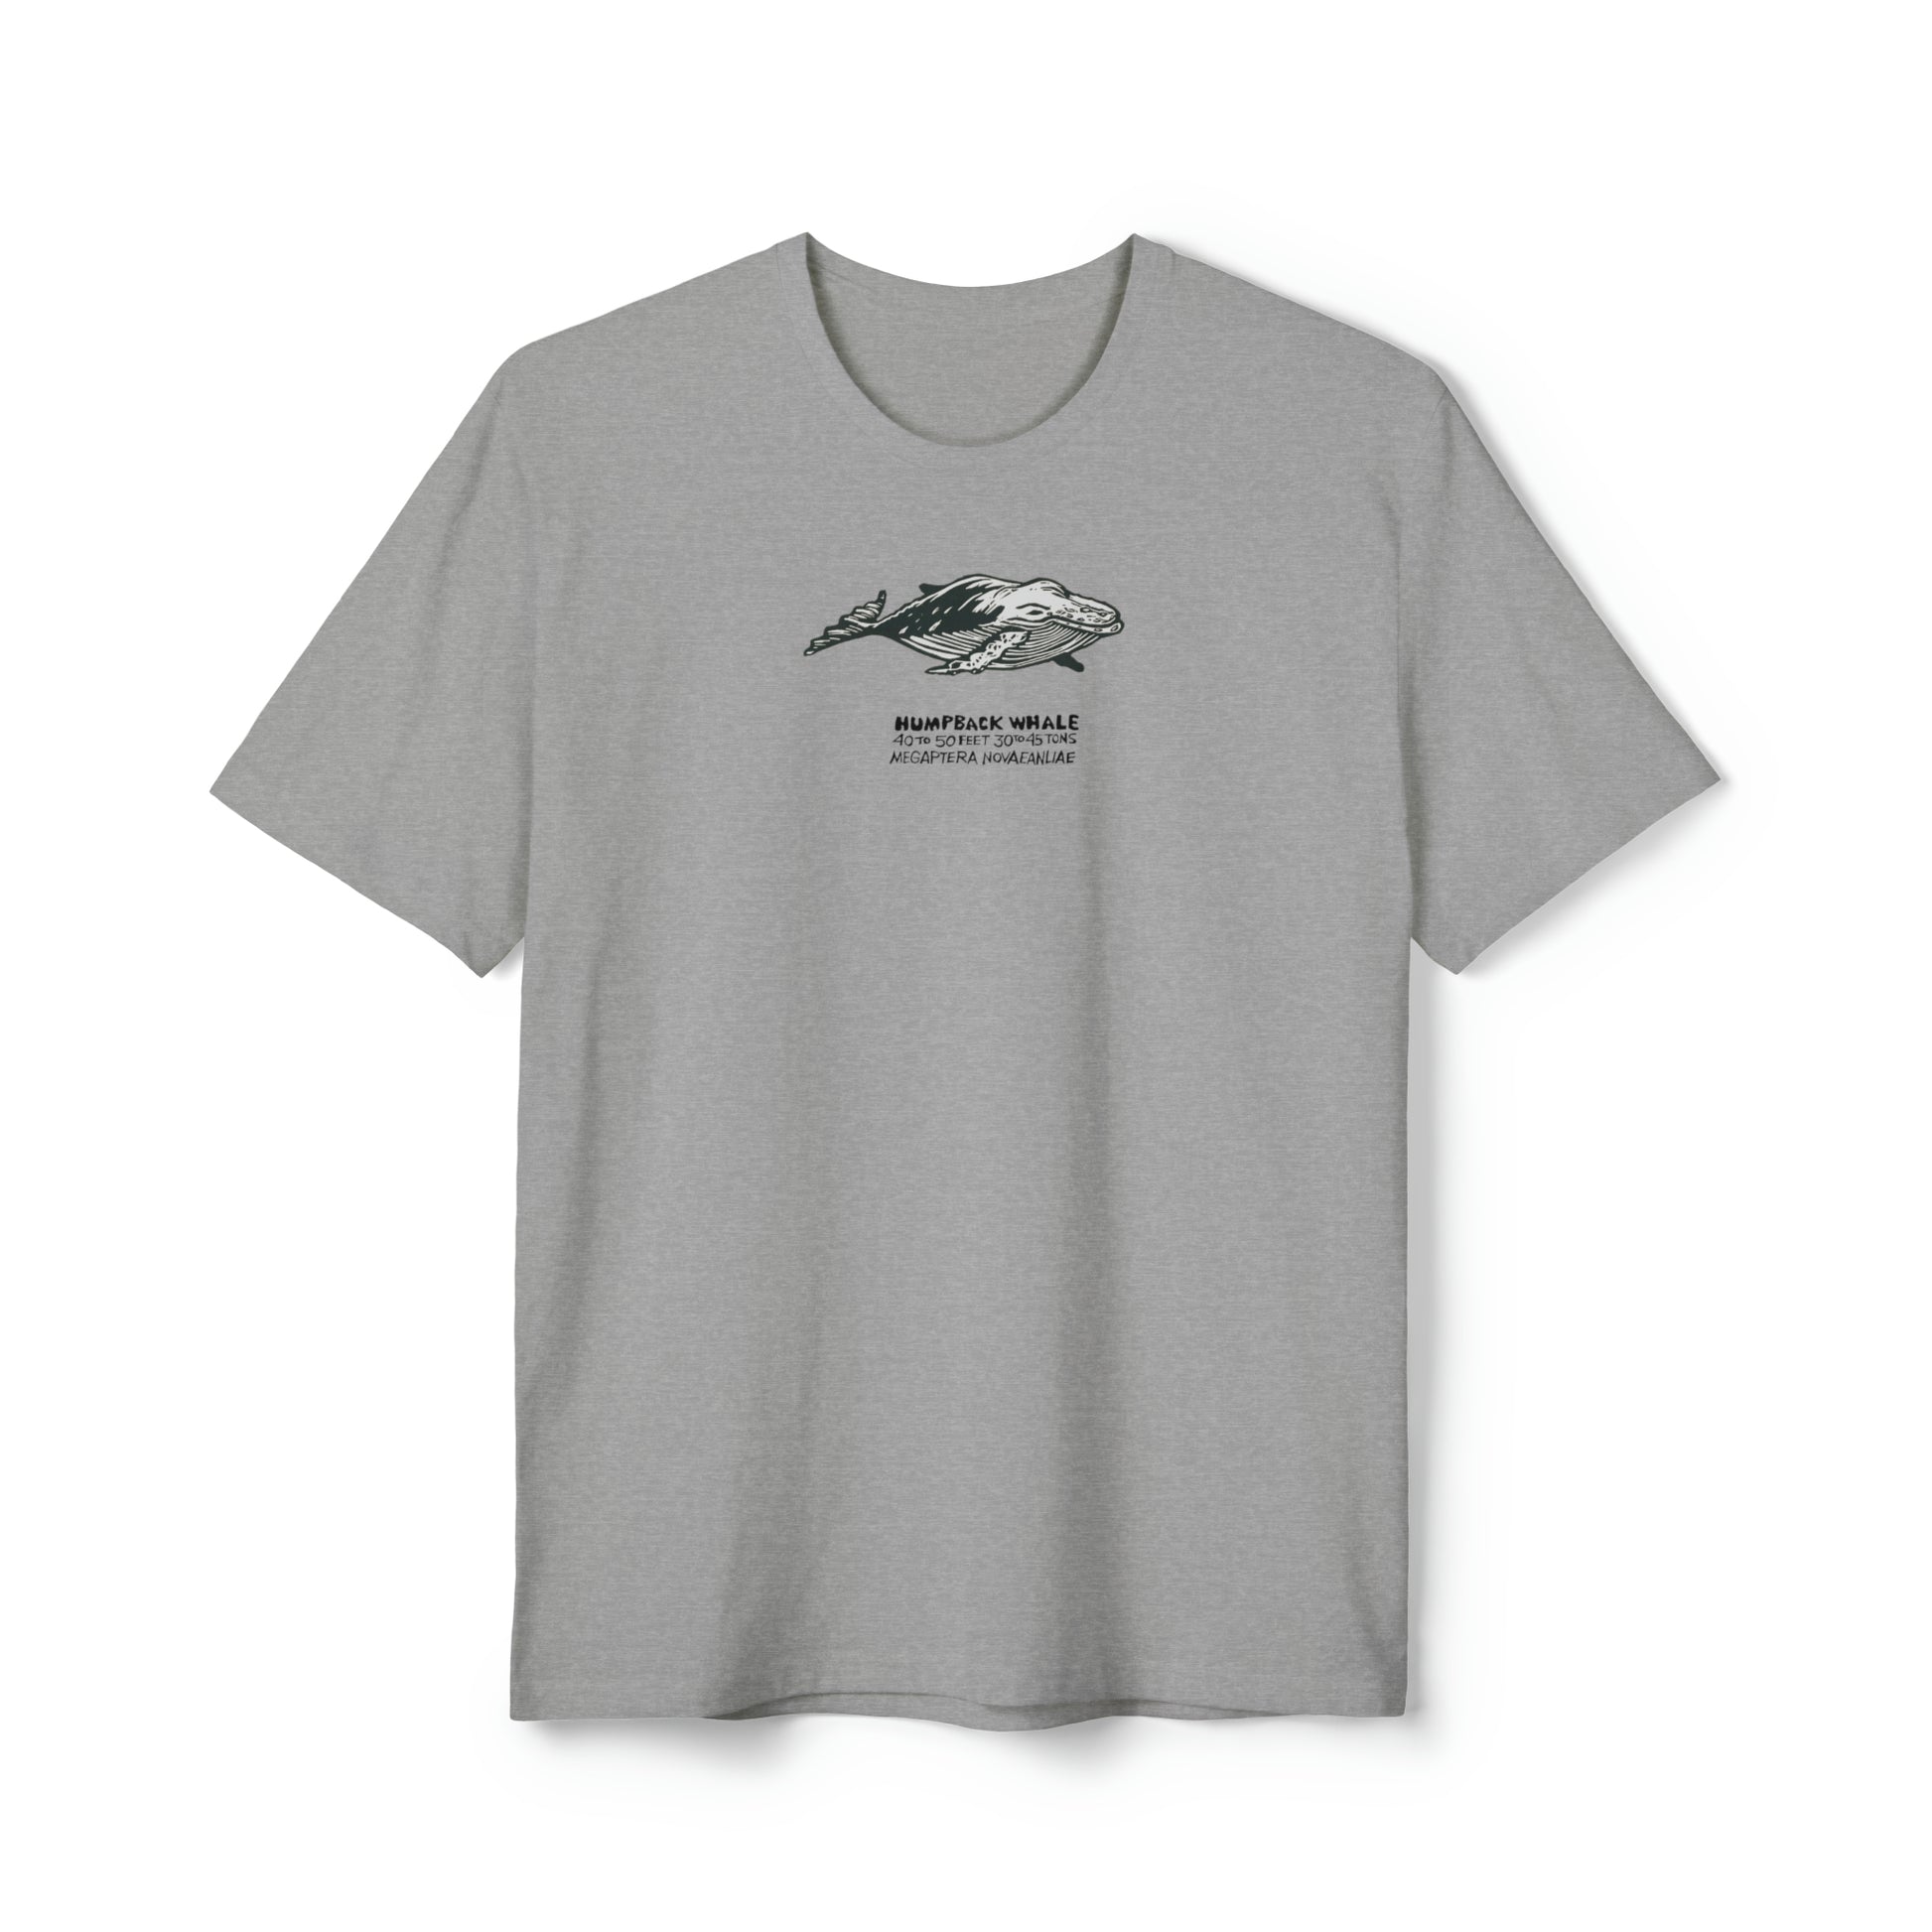 Black, white, and gray Humpback Whale on light heather gray color unisex men's t-shirt. Text under image says Humpback Whale plus height weight and Latin name.